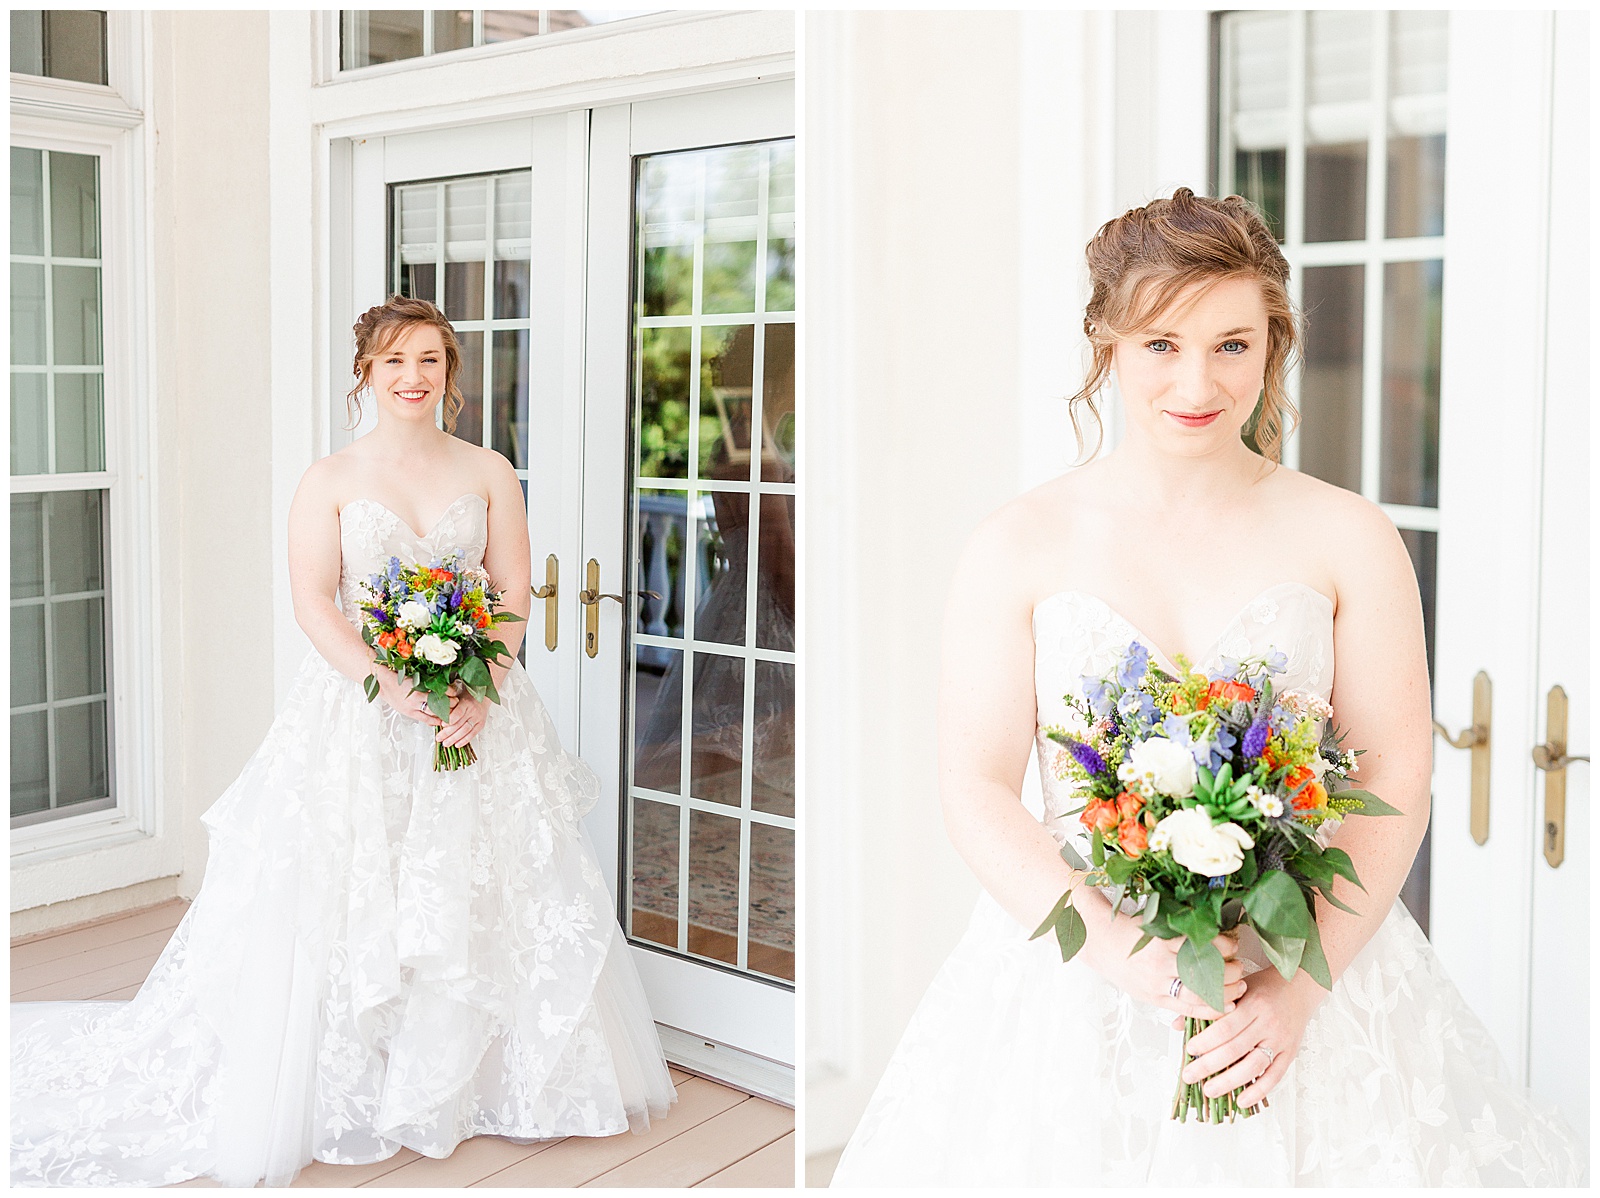 white house mansion location 👰 Bride: lace wedding dress + veil 💐 Colorful orange and blue bouquet 📸 Outdoorsy Lake and Mountain Bridal Session with Julia | Kevyn Dixon Photography